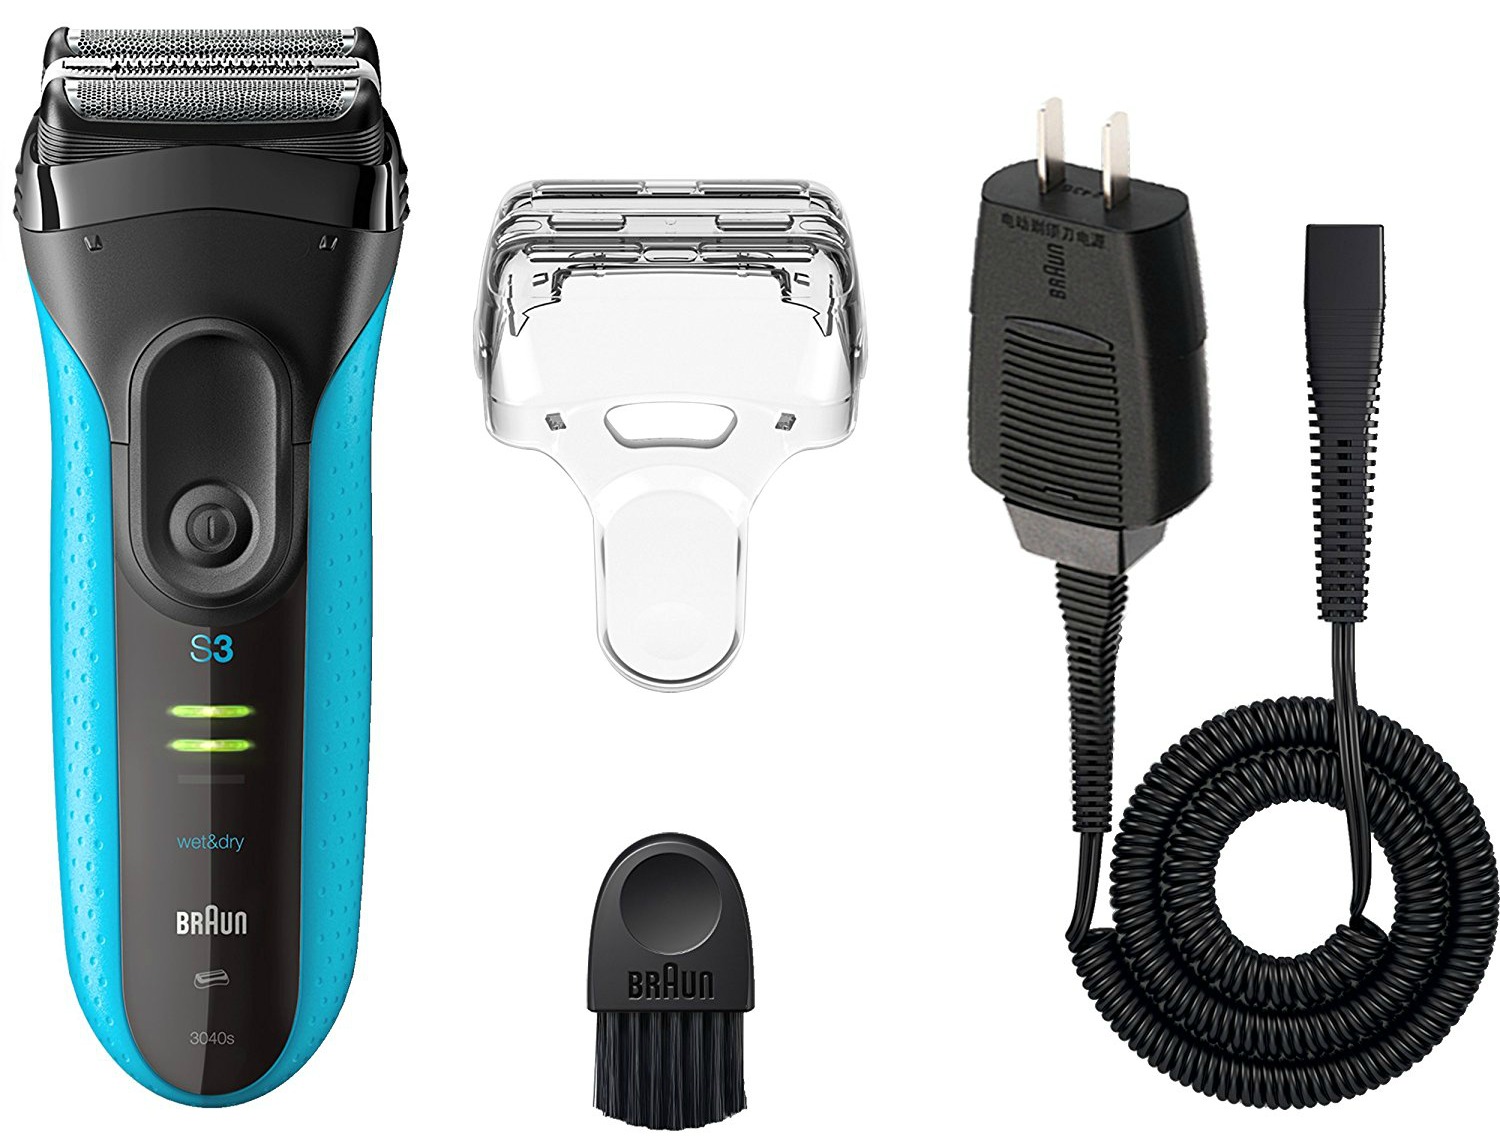 braun-electric-rechargeable-shaver-just-21-49-shipped-after-rebate